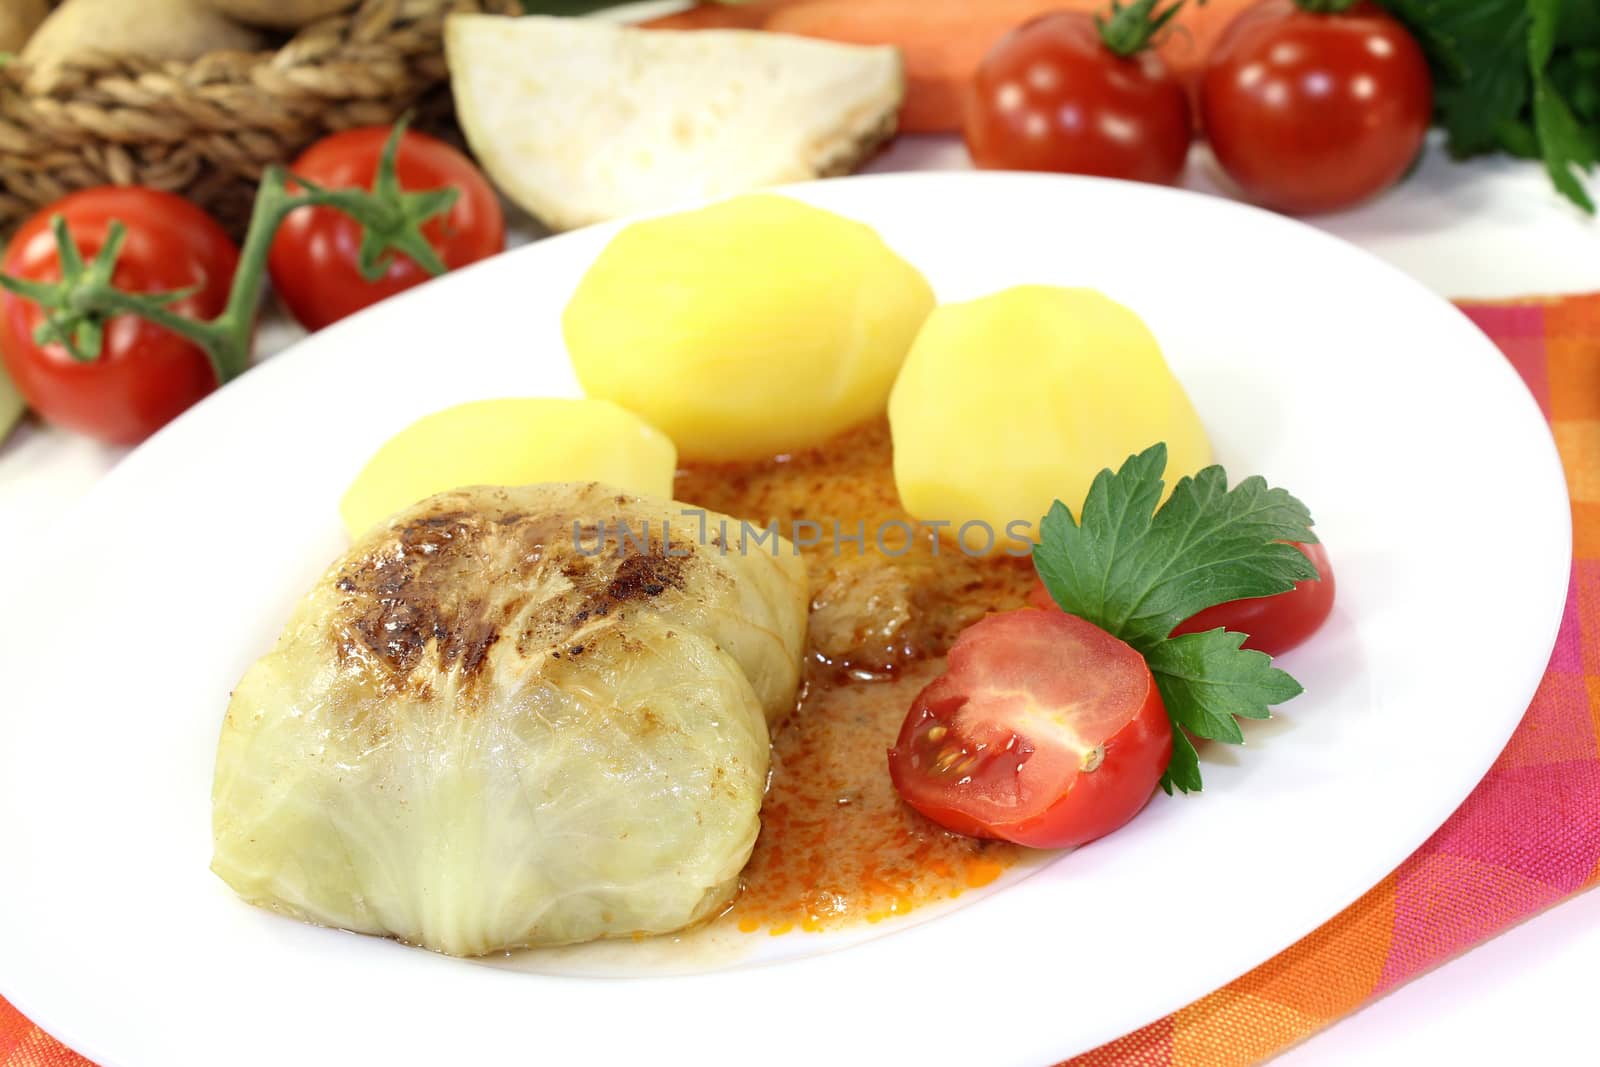 Stuffed cabbage with potatoes and gravy on a light background